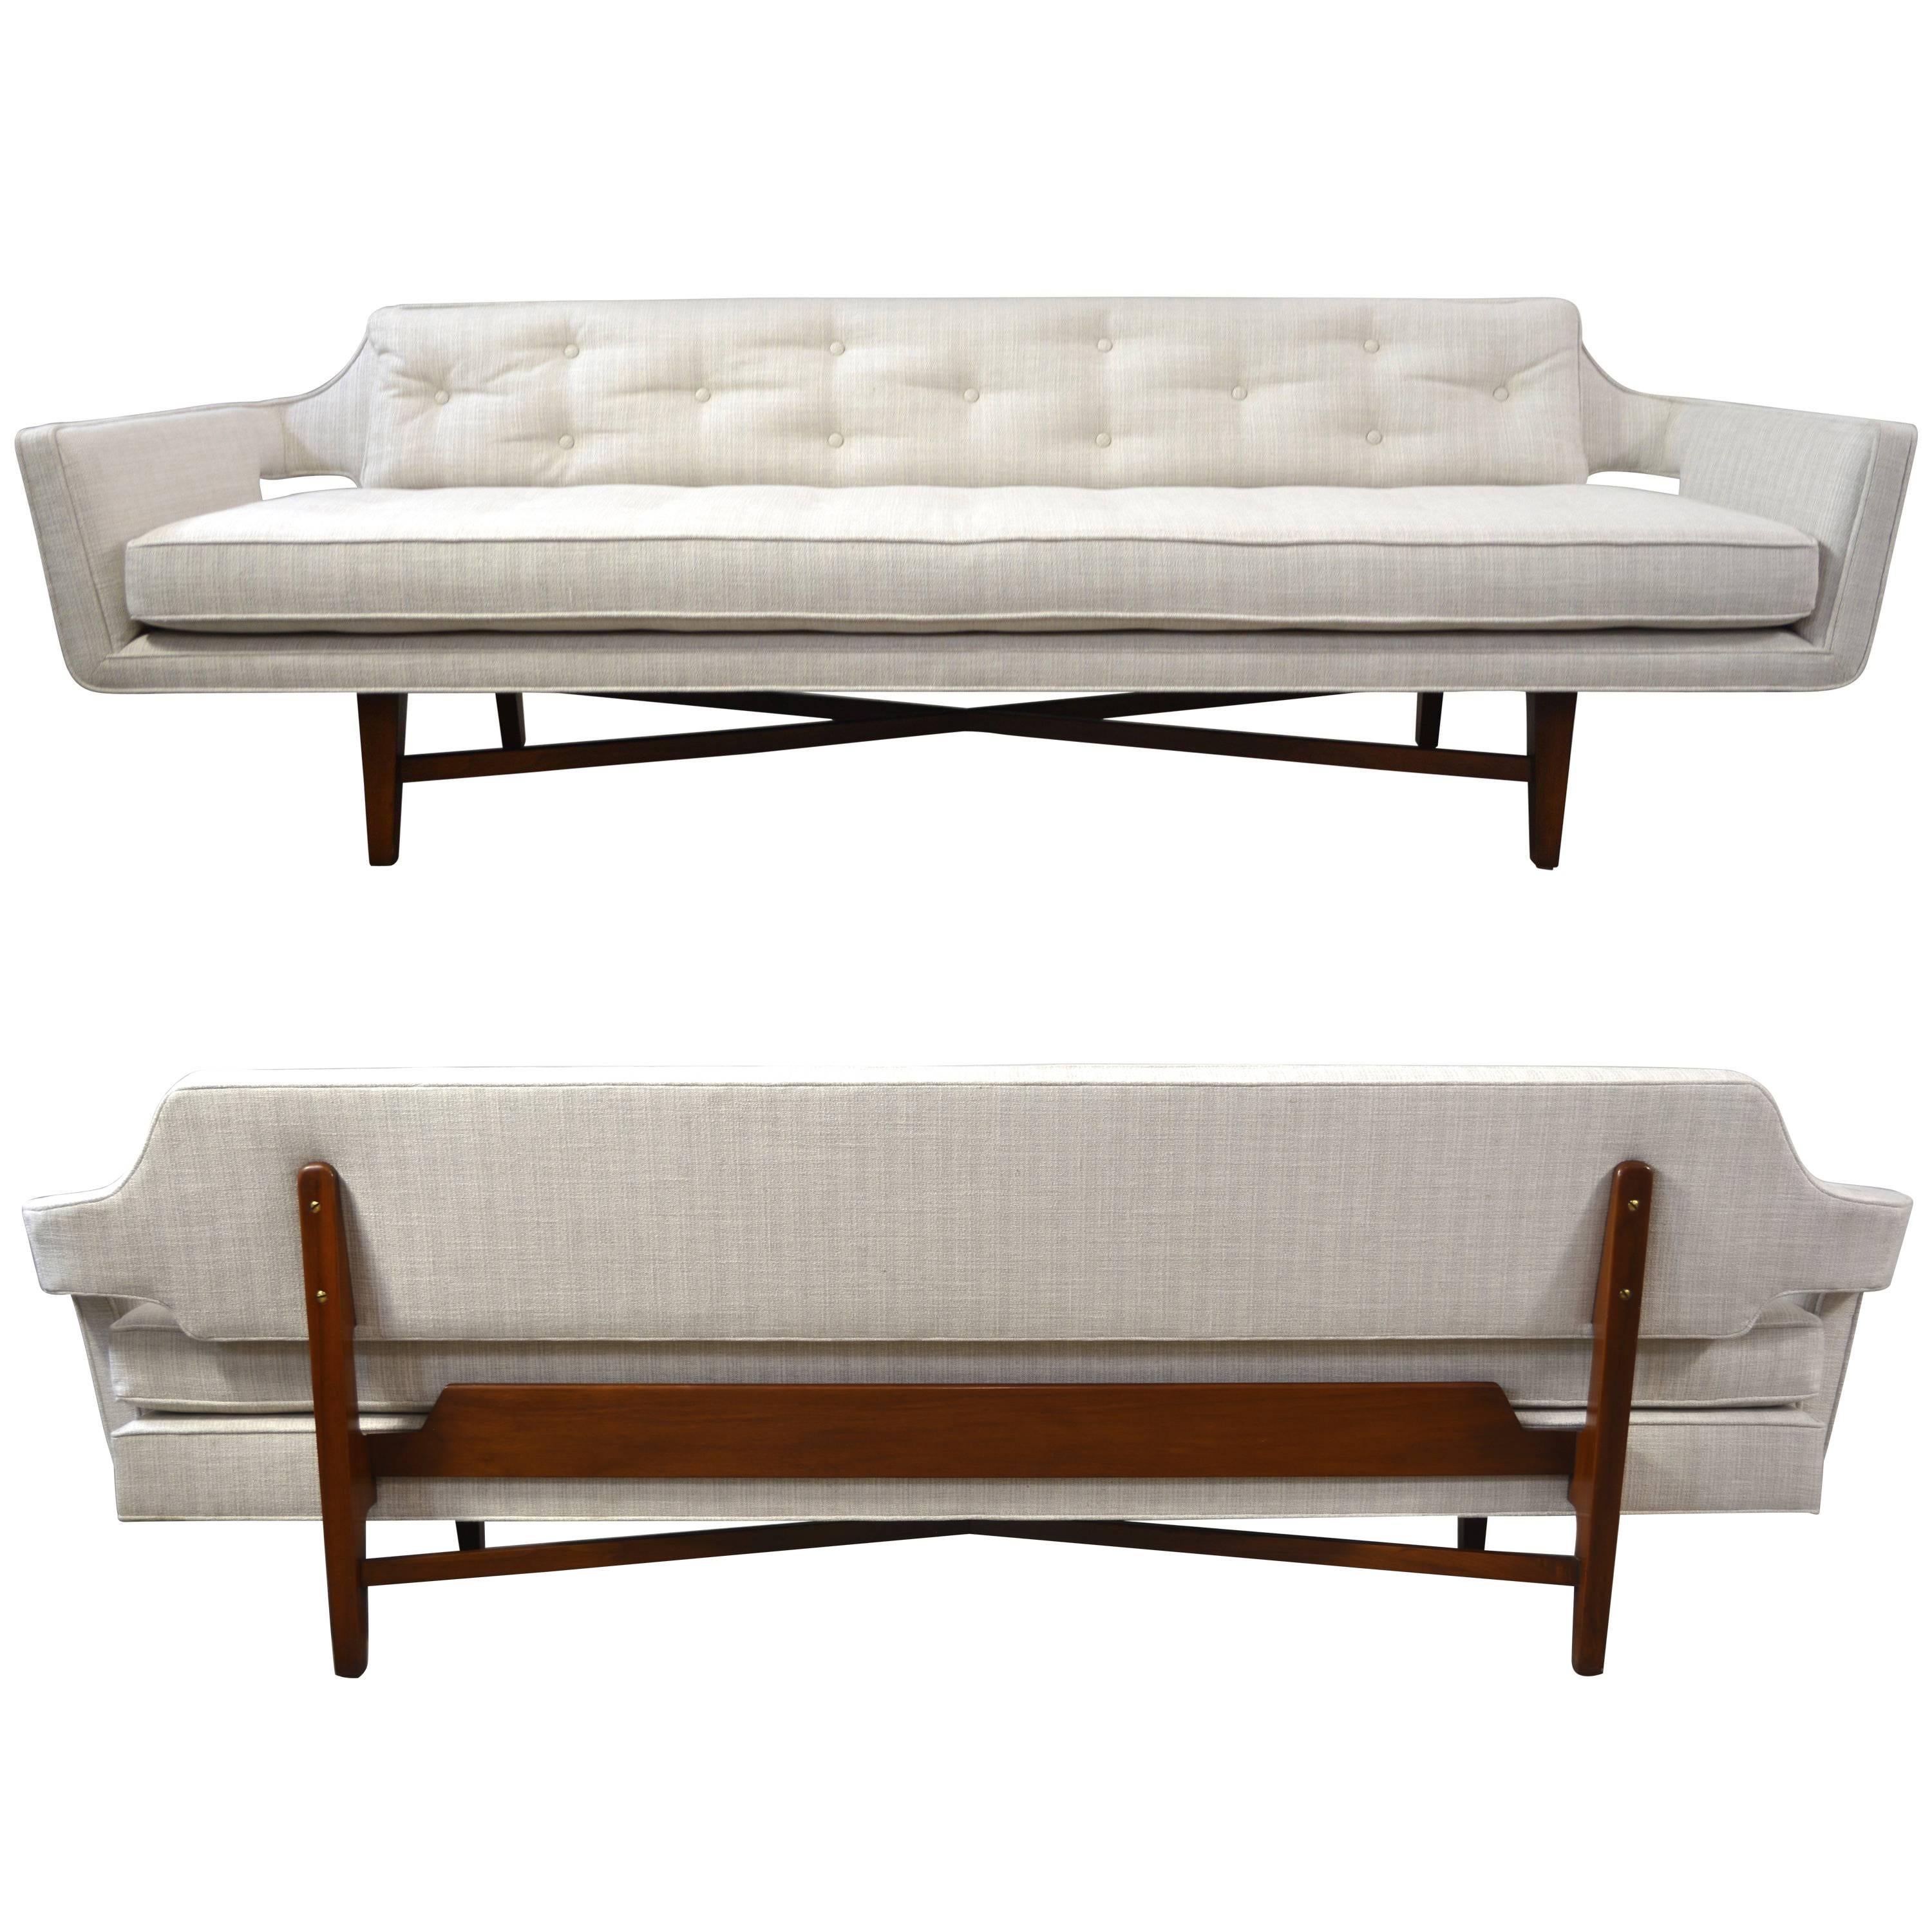 Pair of Sofas by Edward Wormley for Dunbar For Sale